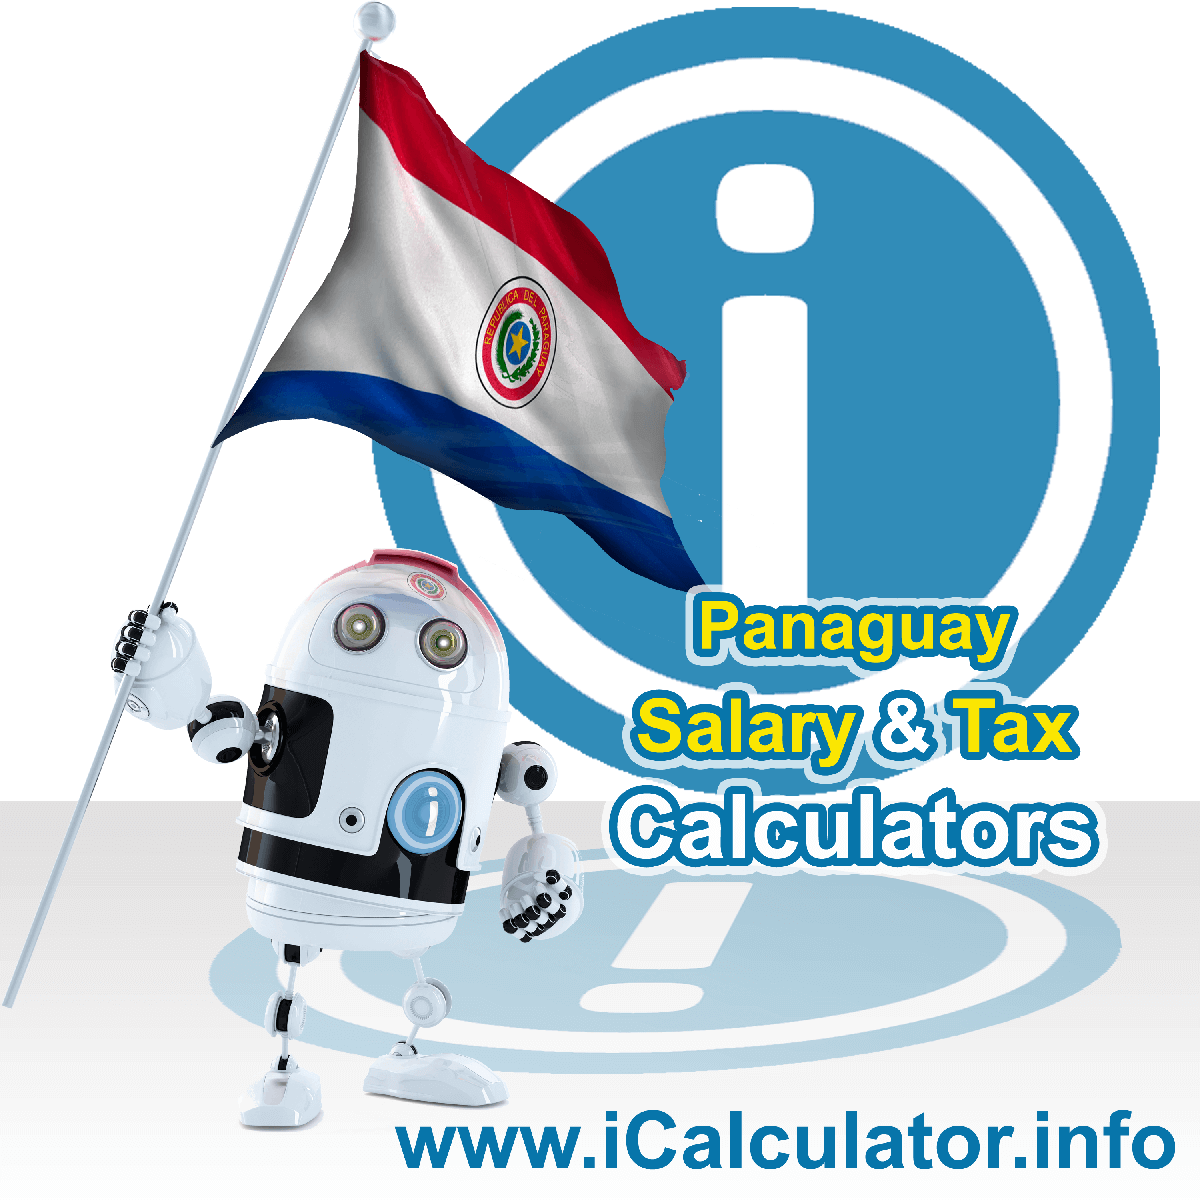 Paraguay Tax Calculator. This image shows the Paraguay flag and information relating to the tax formula for the Paraguay Salary Calculator